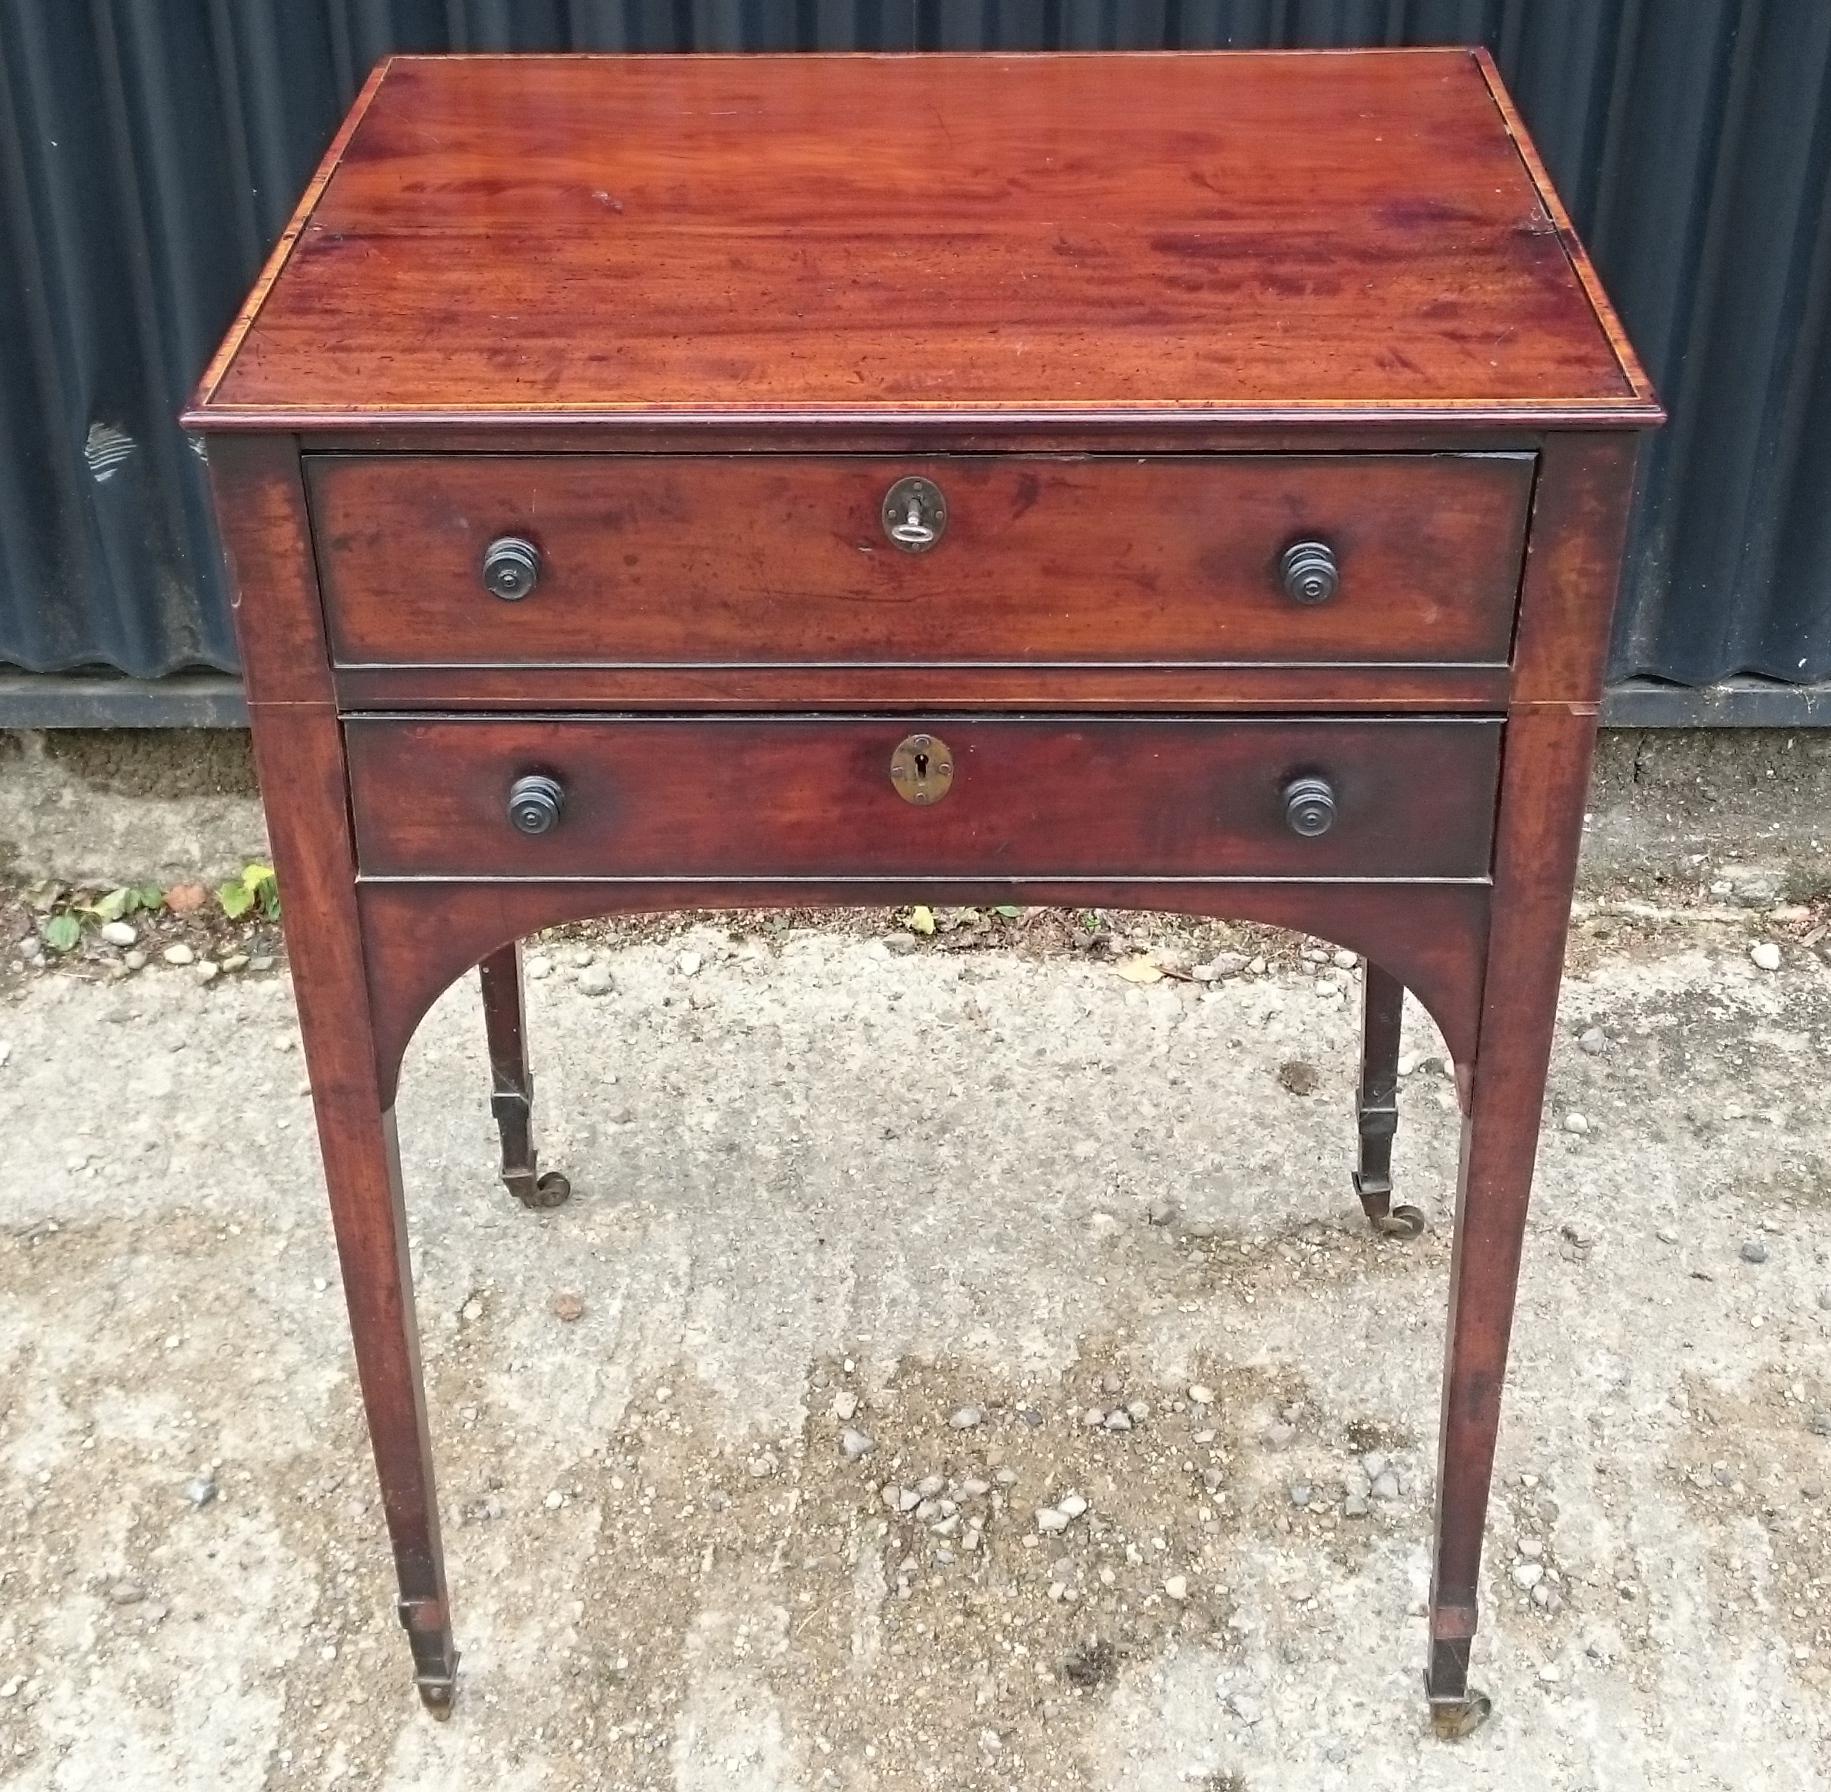 18th century George III period mahogany pot cupboard nightstand. This is a charming little bed side table, made of proper mahogany of the sort that just seems to have run out by the end of the Georgian era, because it is so much more interesting